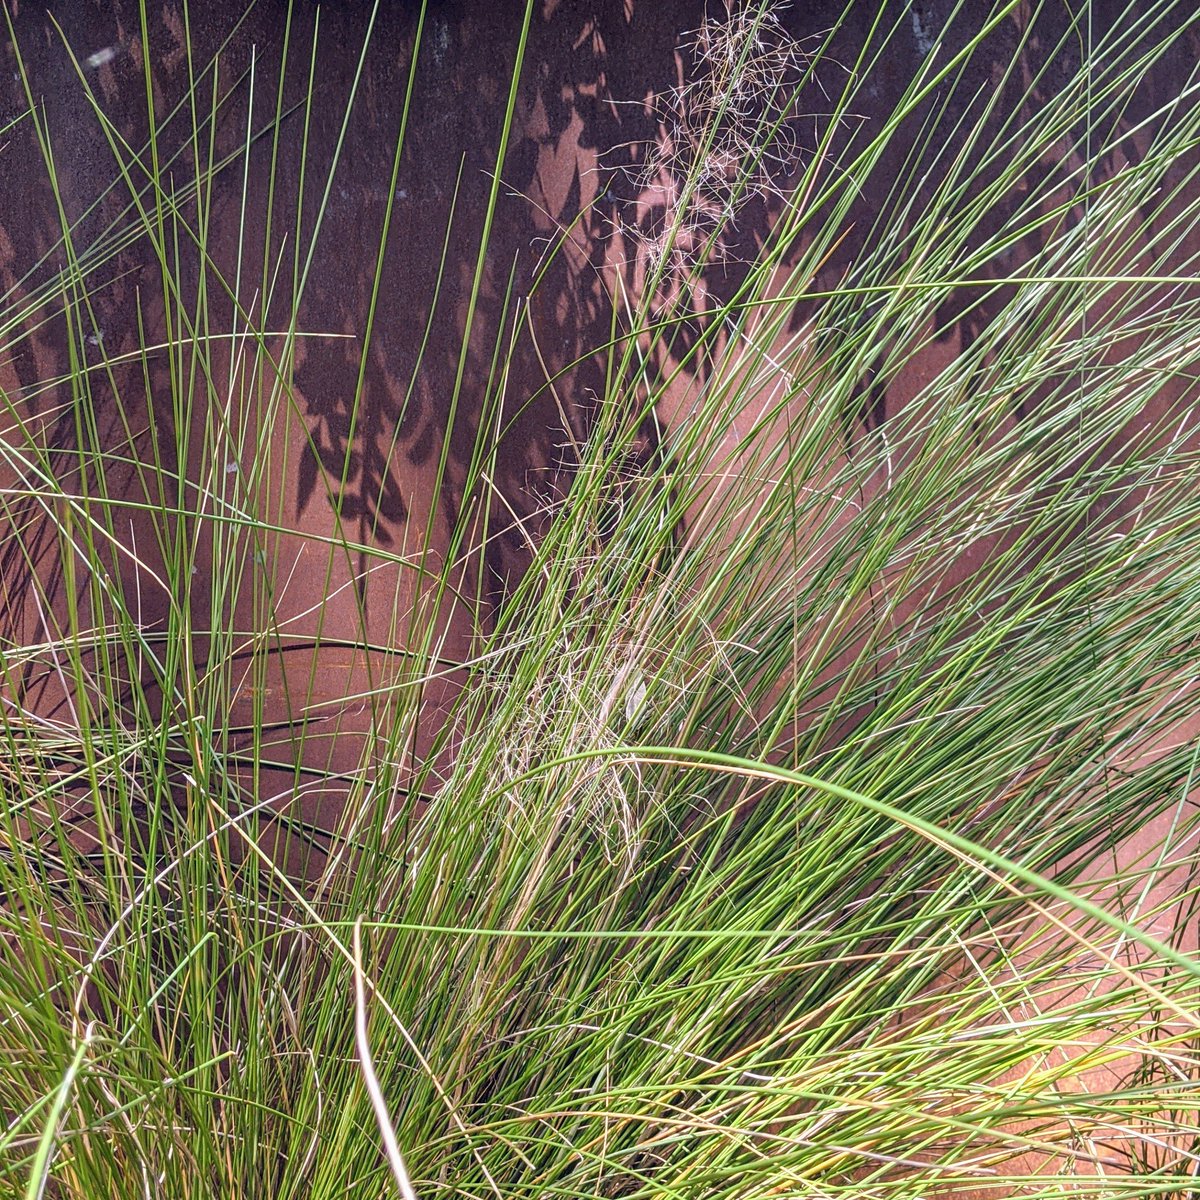 Gulf Mulhy (aka Pink Mulhy) - Muhlenbergia capillarisLocal native grass. Has huge pink bloom when nature. Great as ornamental.A bit hard to find. Snatch it up if you see it. I spent months looking for a local source.